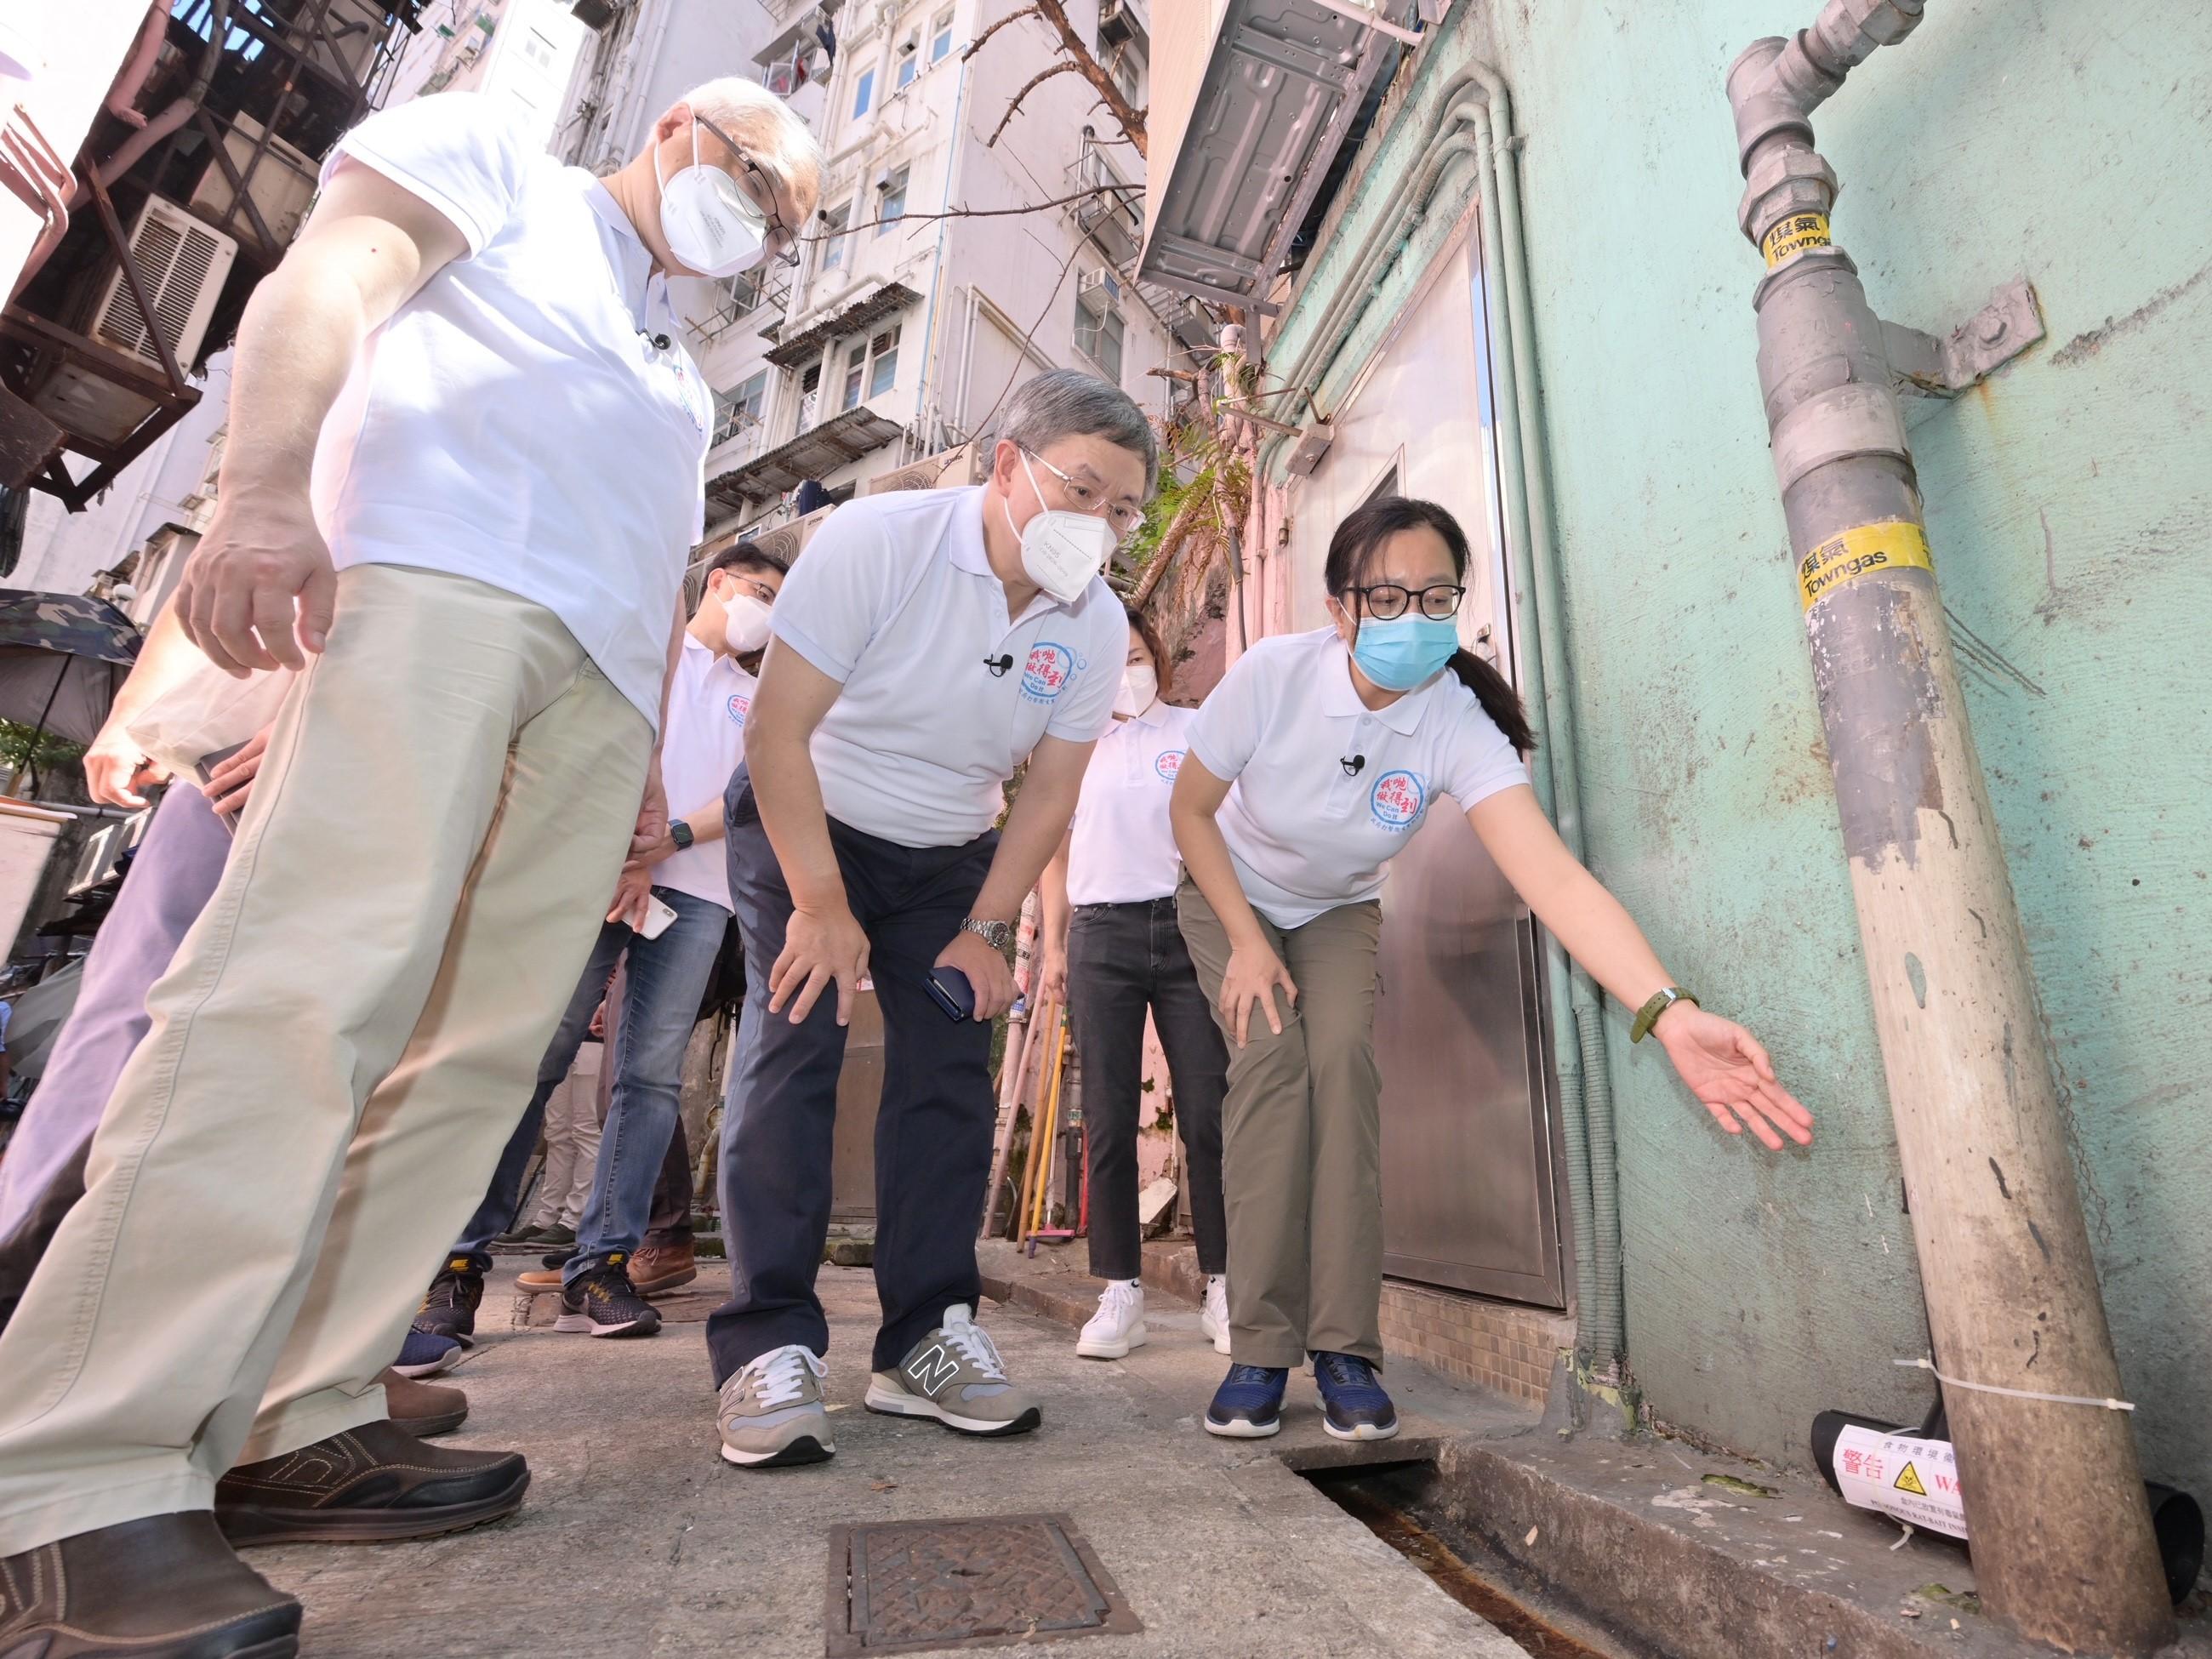 The Deputy Chief Secretary for Administration, Mr Cheuk Wing-hing, inspected hygiene black spot in Lai Chi Kok Road today (August 14). Photo shows Mr Cheuk (centre) looking on as baits set in the hygiene black spot. Also present is the Secretary for Environment and Ecology, Mr Tse Chin-wan (left).